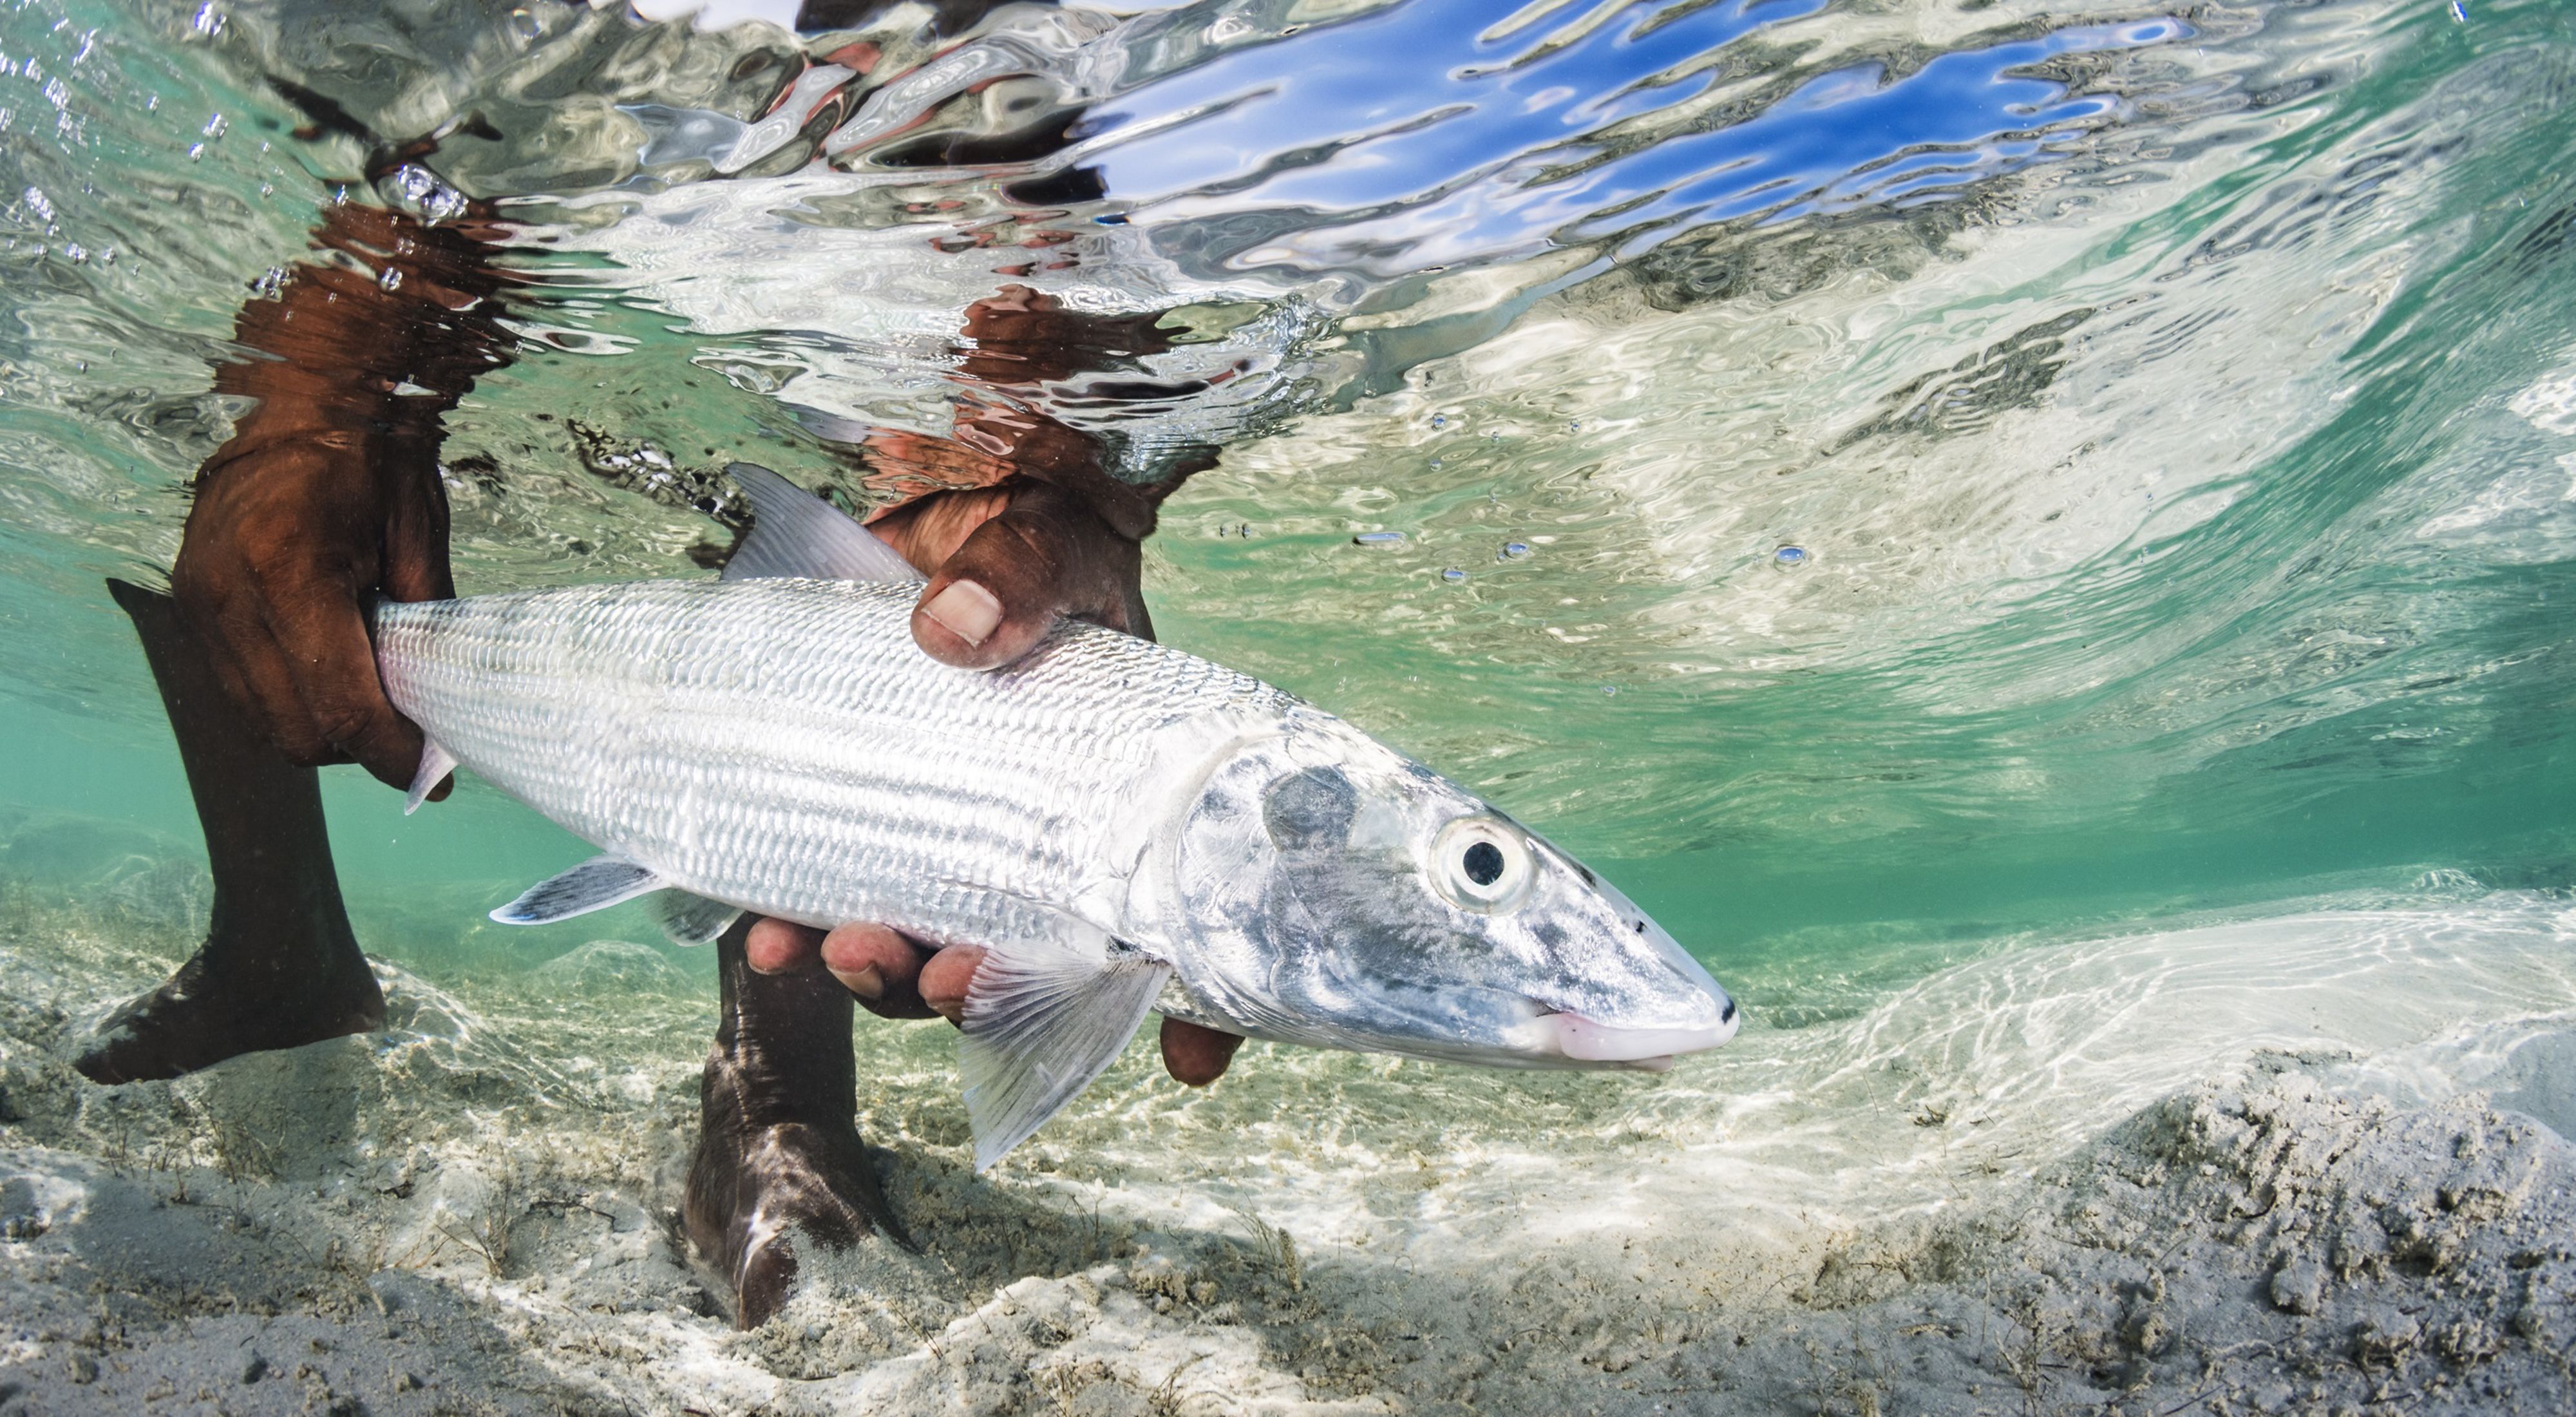 Bahamian man holding a silver fish under the water.